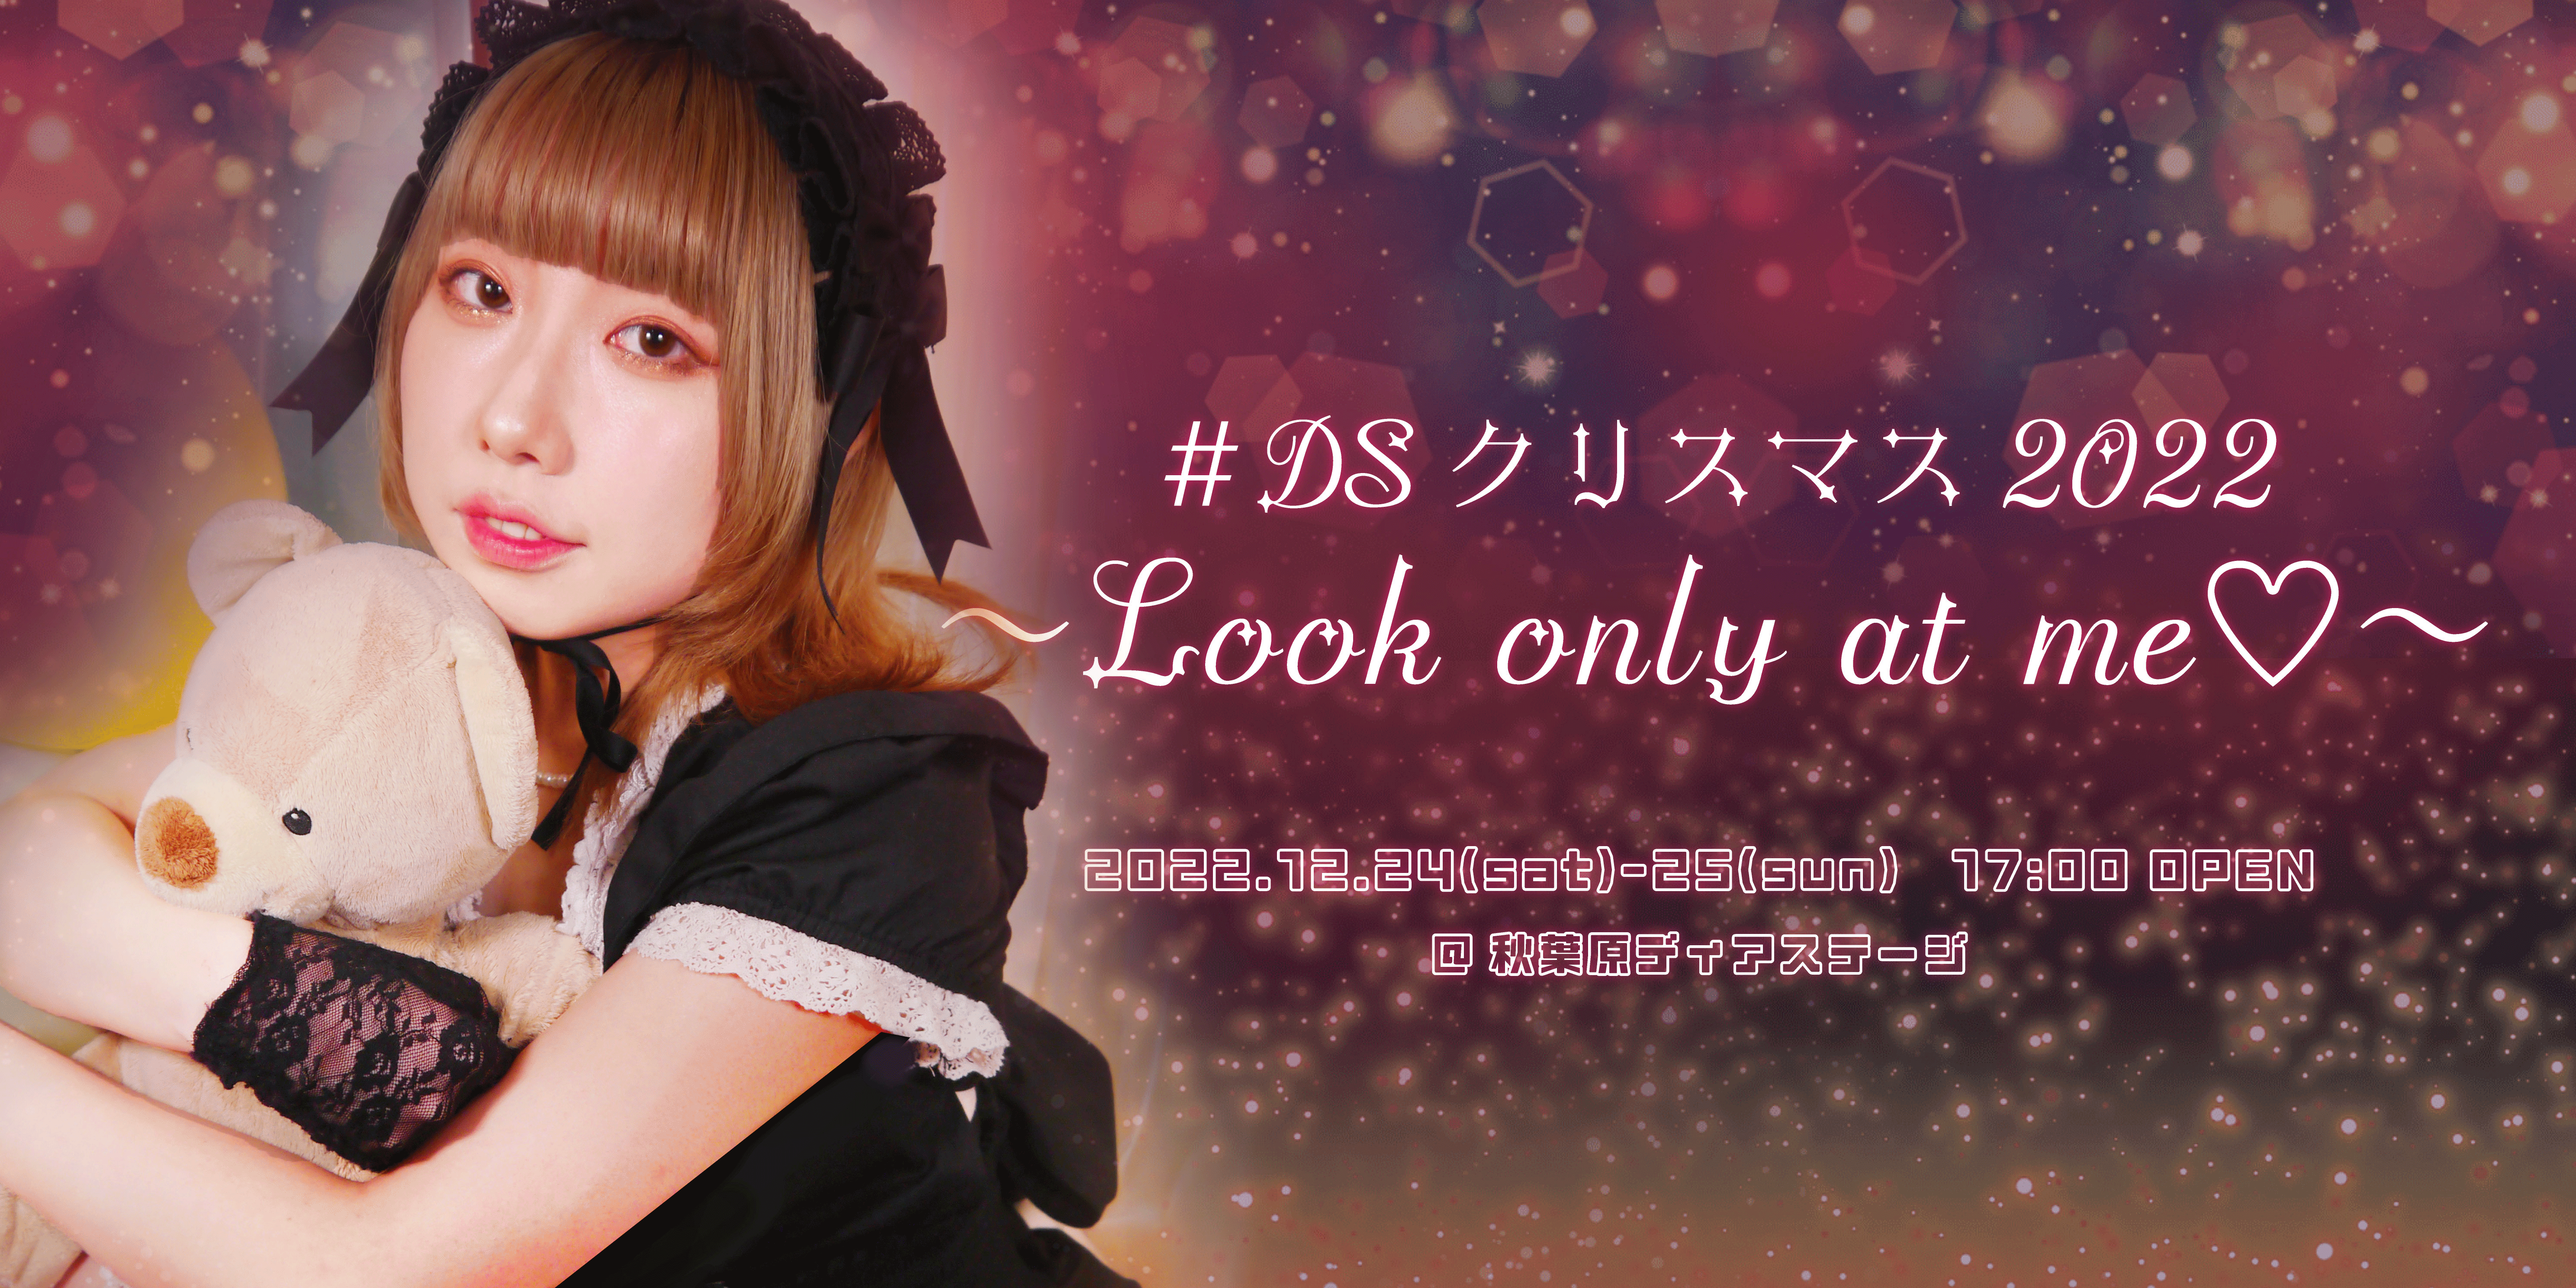 ＃DSクリスマス2022〜Look only at me♡〜